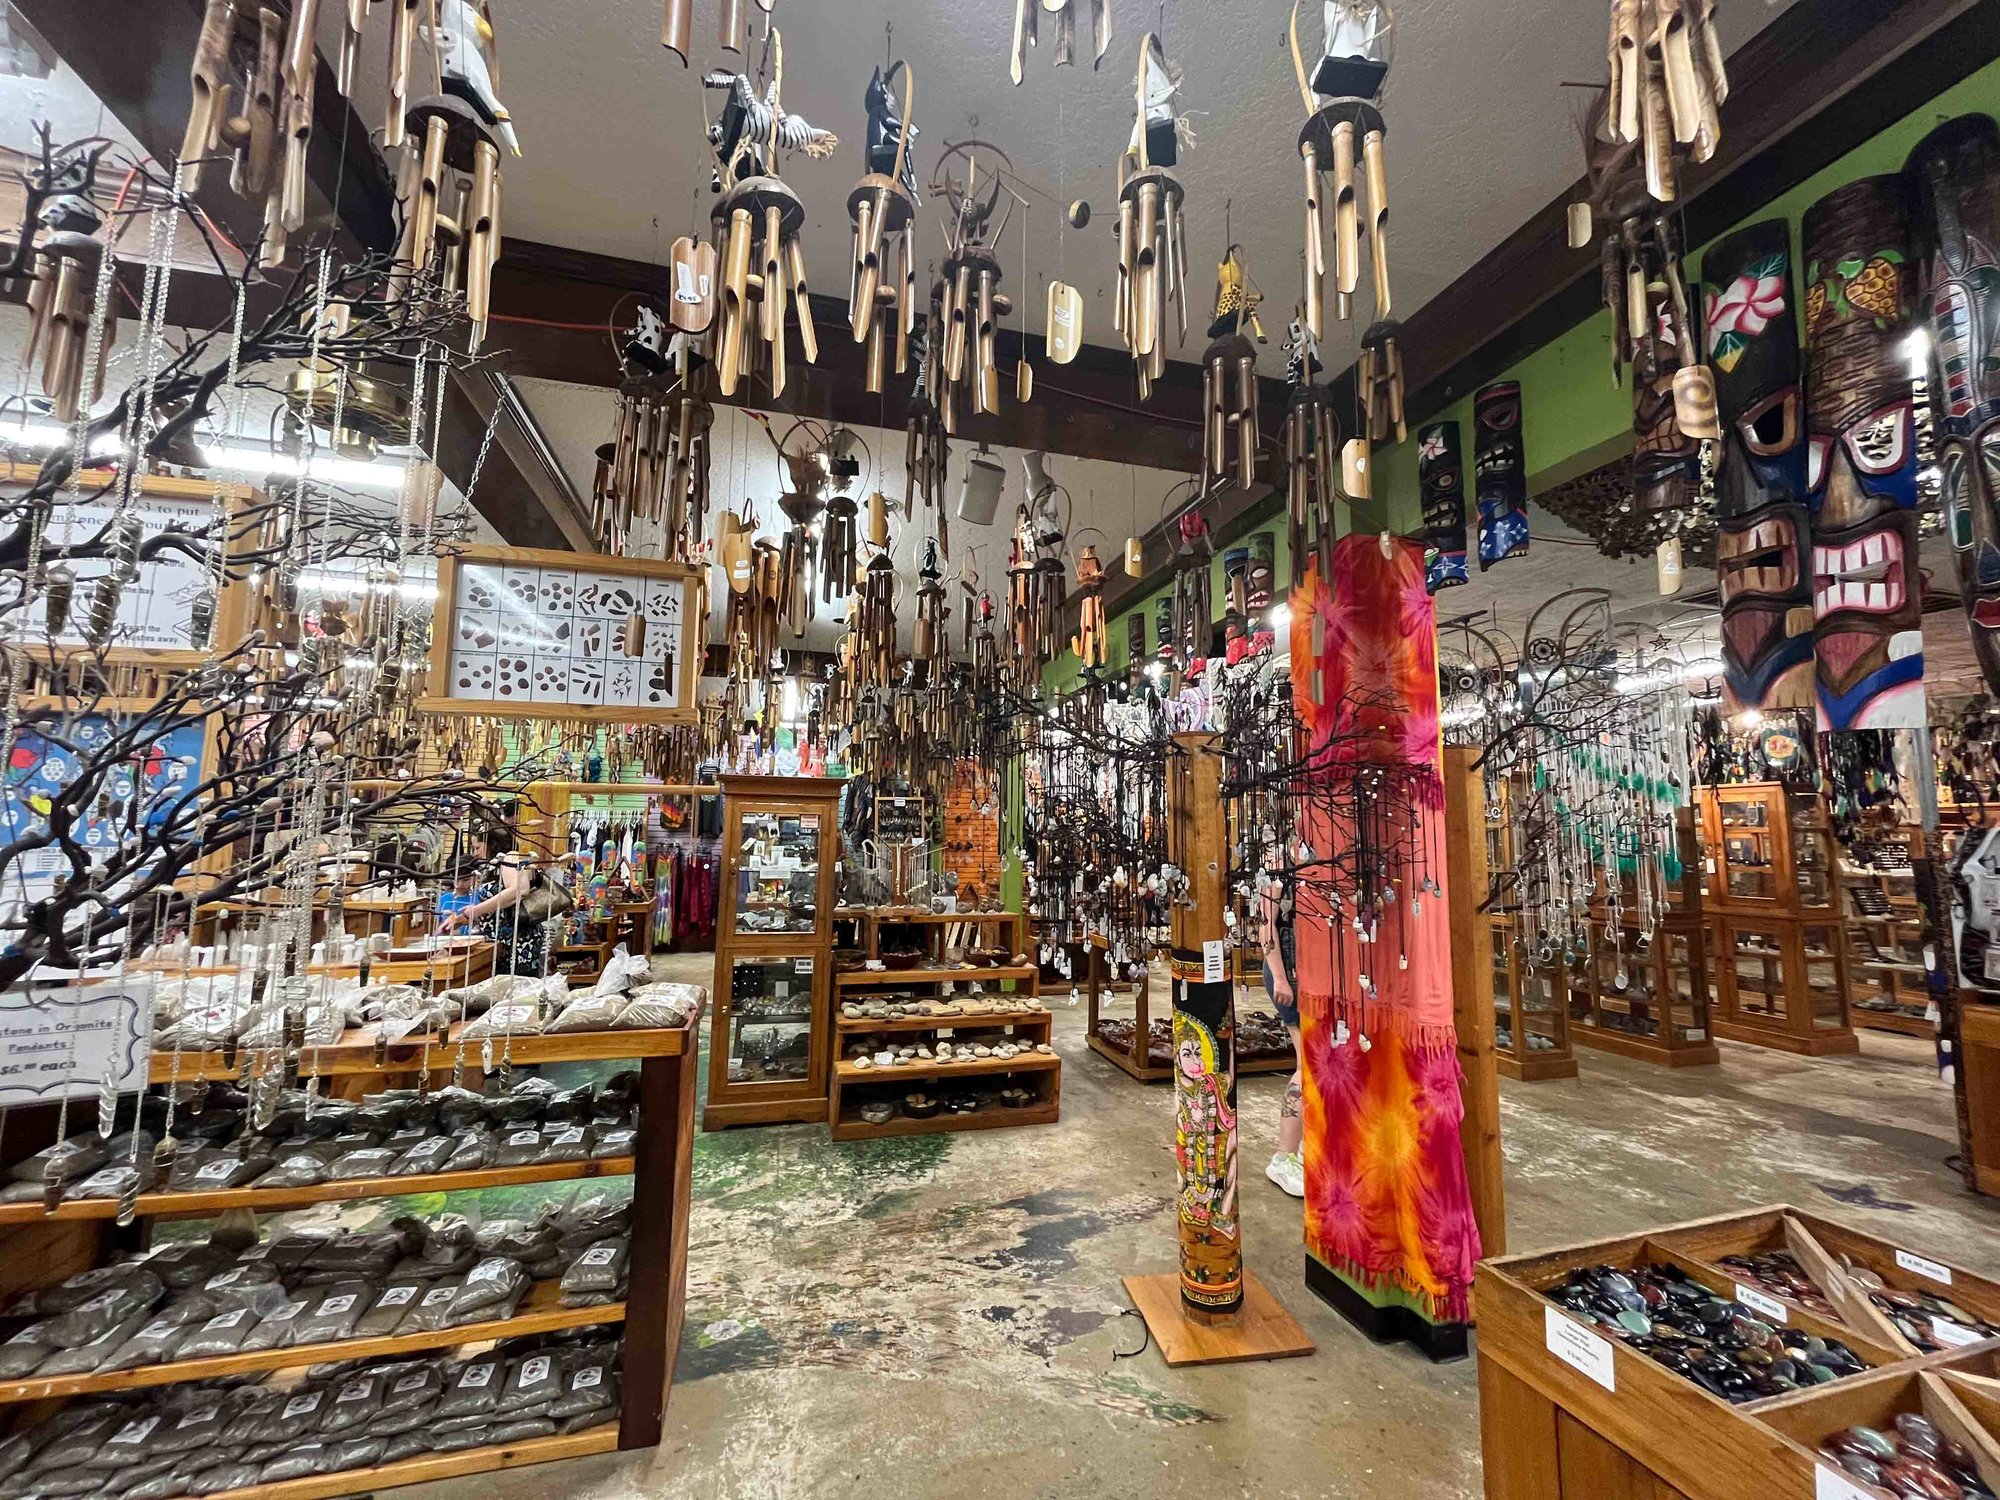 large store filled with wooden wind chimes and various mineral goods